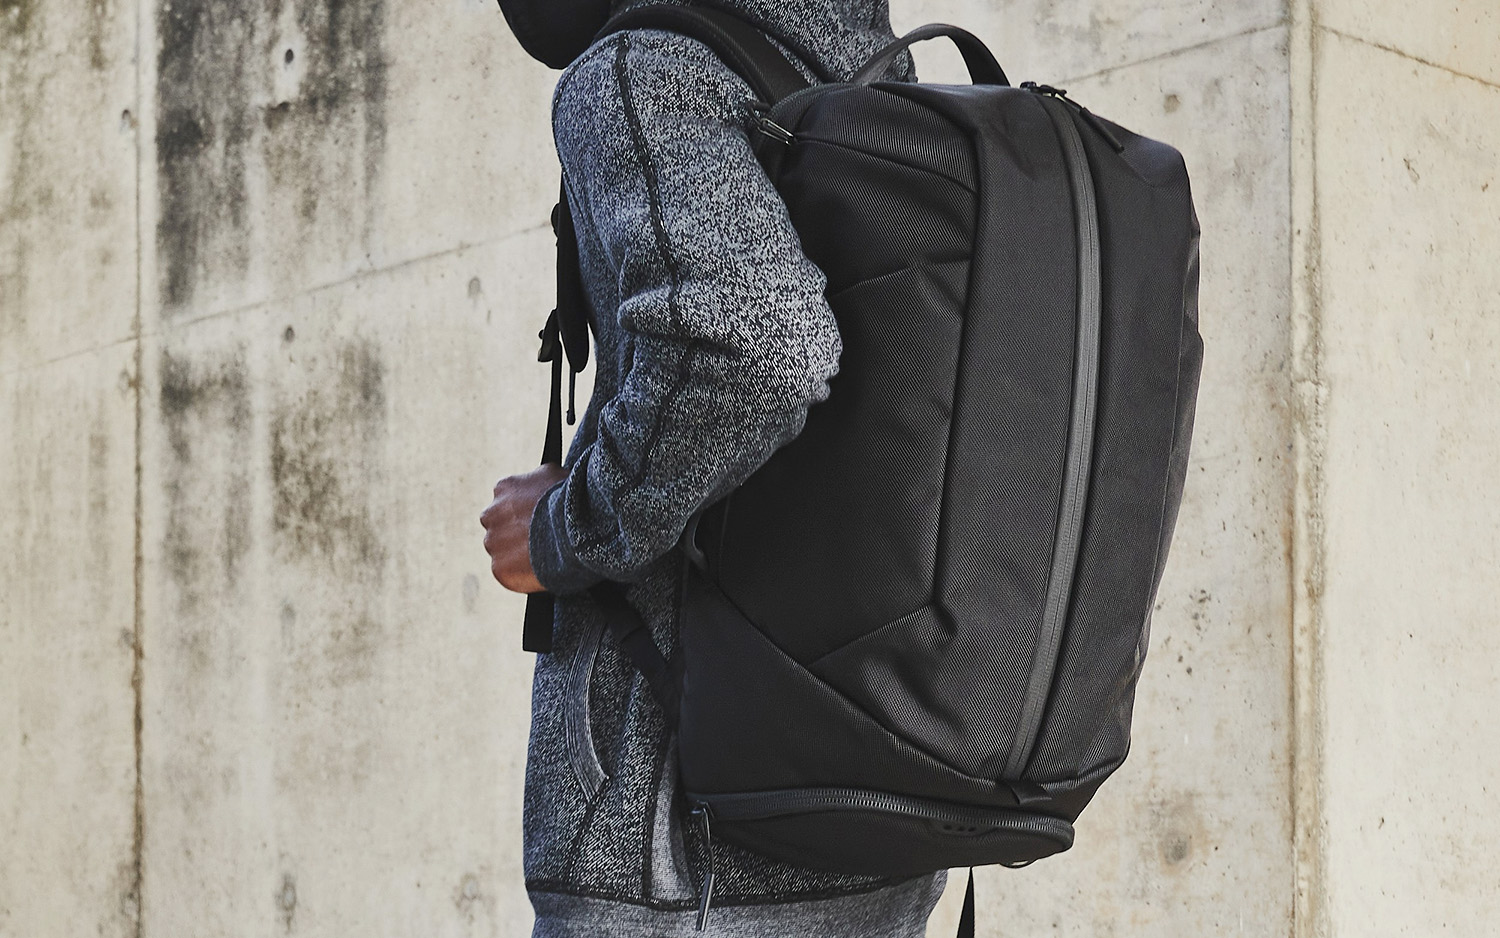 Best Men's Gym Bags for 2022